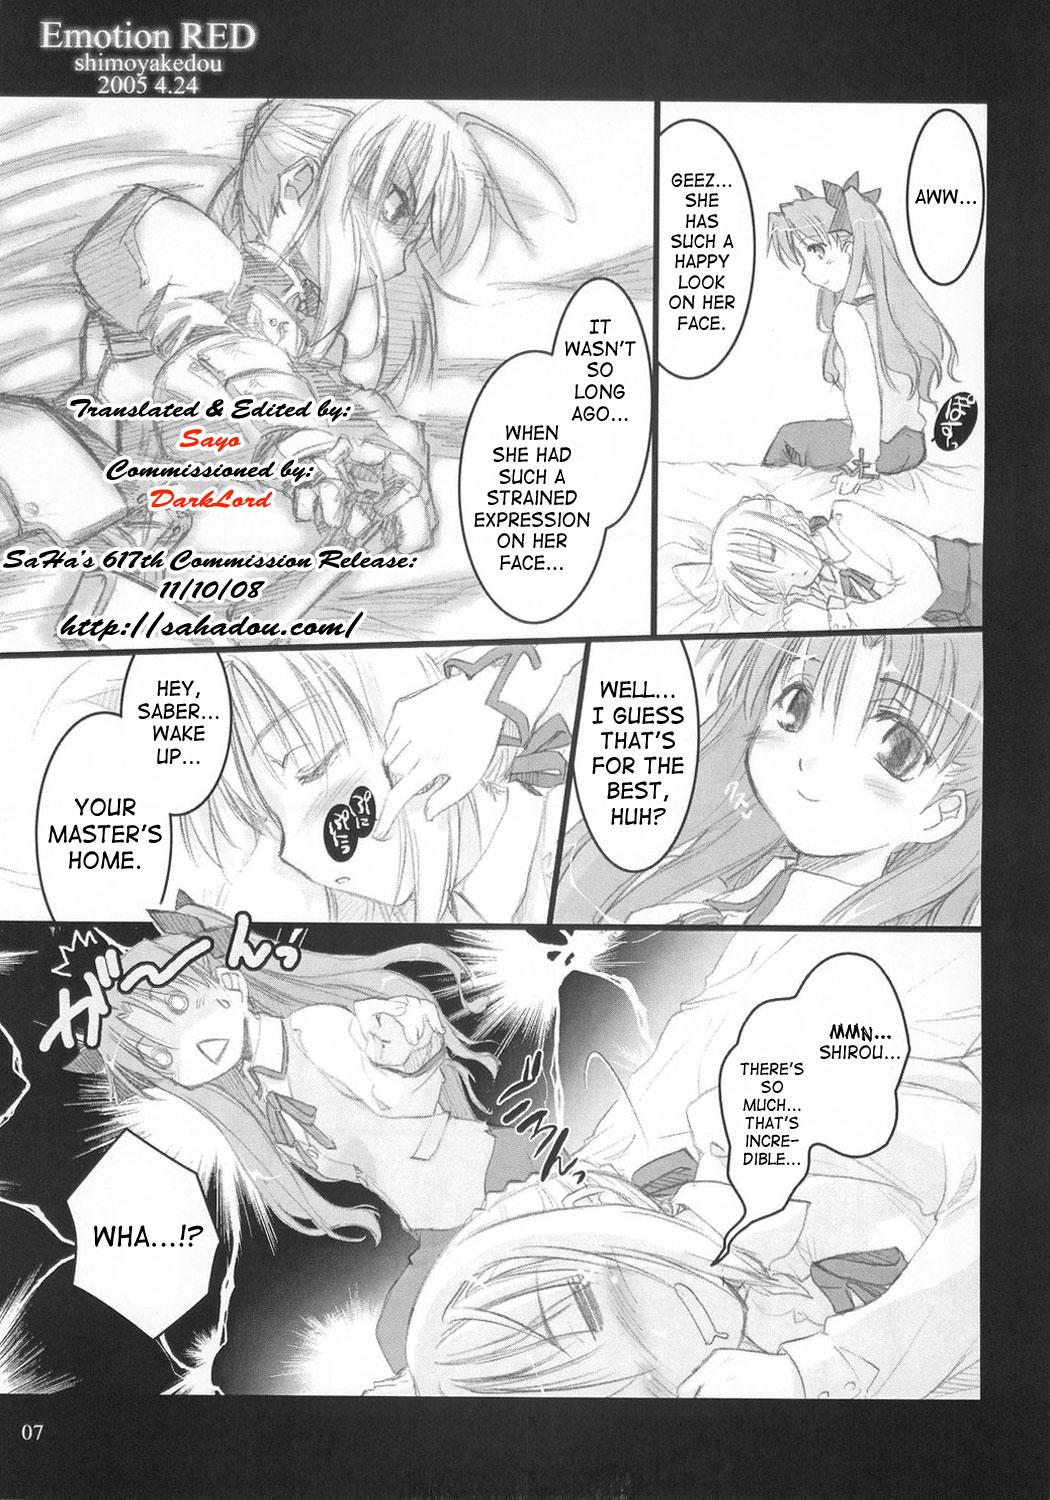 Double Emotion RED - Fate stay night Gag - Page 6